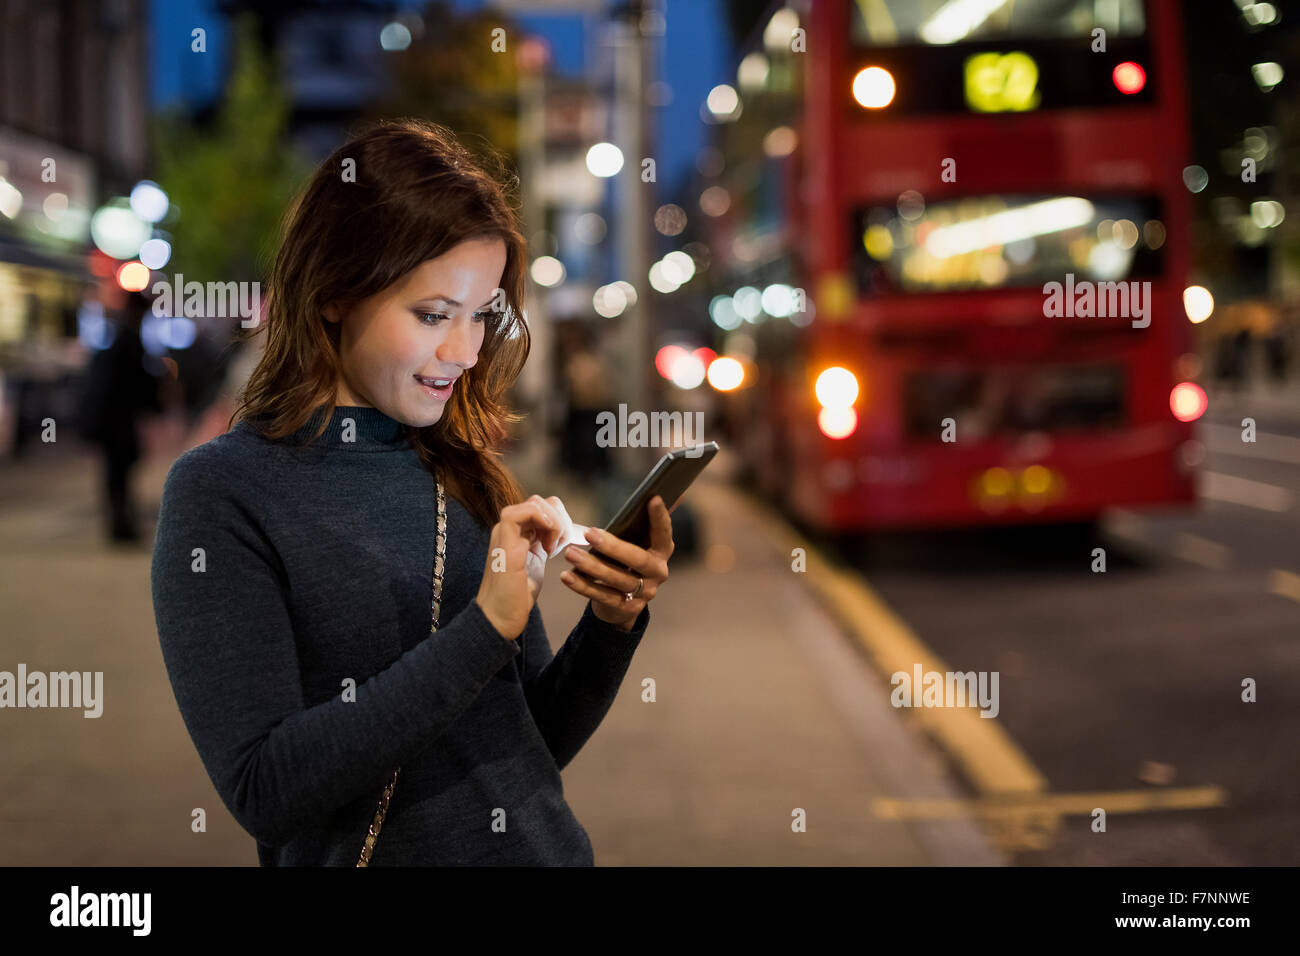 UK, London, woman checking her smartphone by the roadside Stock Photo